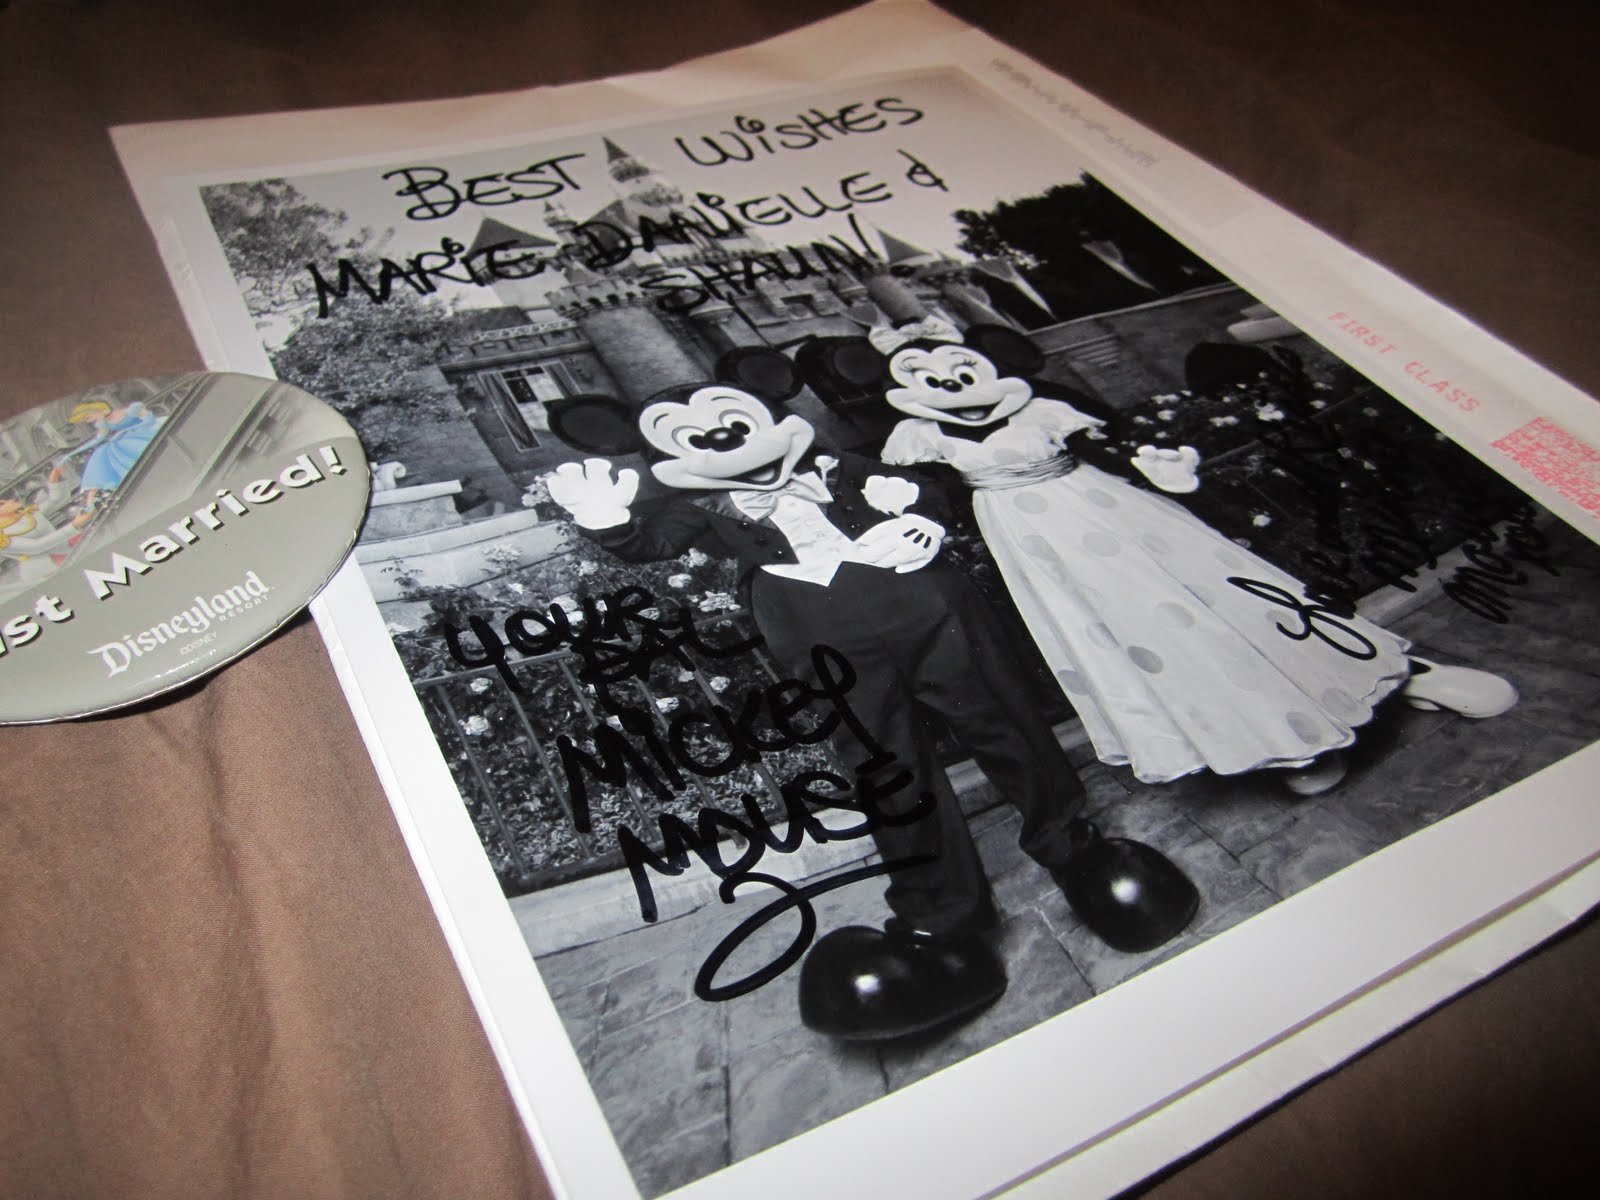 Mickey and Minnie Mouse's response to a wedding invitation. Image: San Francisco bride, Mrs Seal